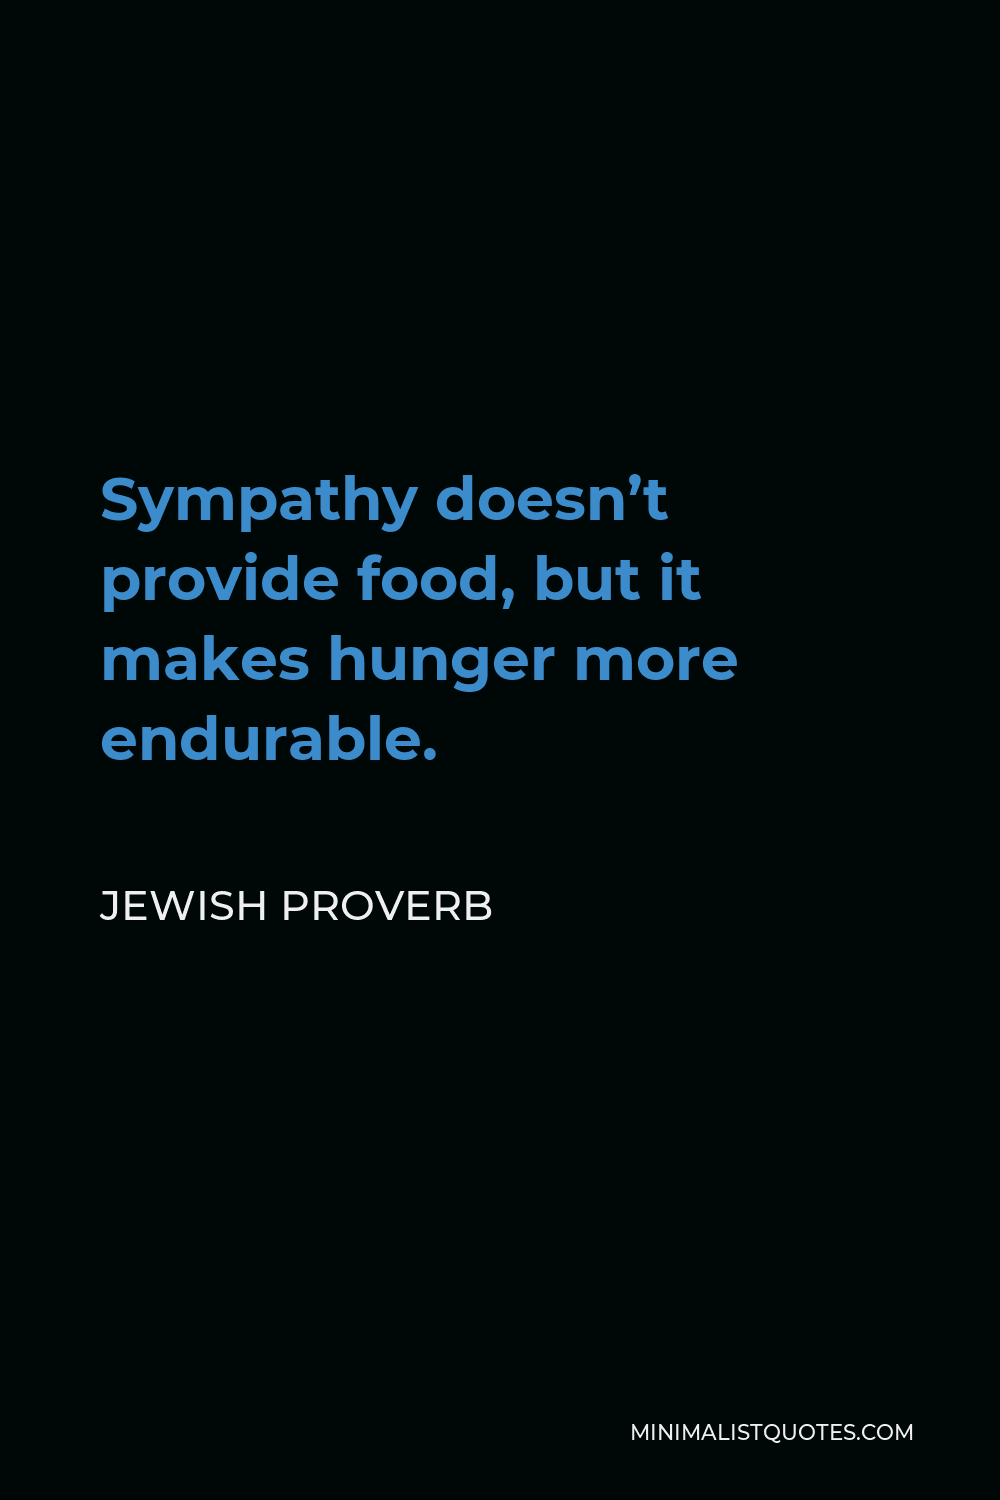 Jewish Proverb Quote - Sympathy doesn’t provide food, but it makes hunger more endurable.